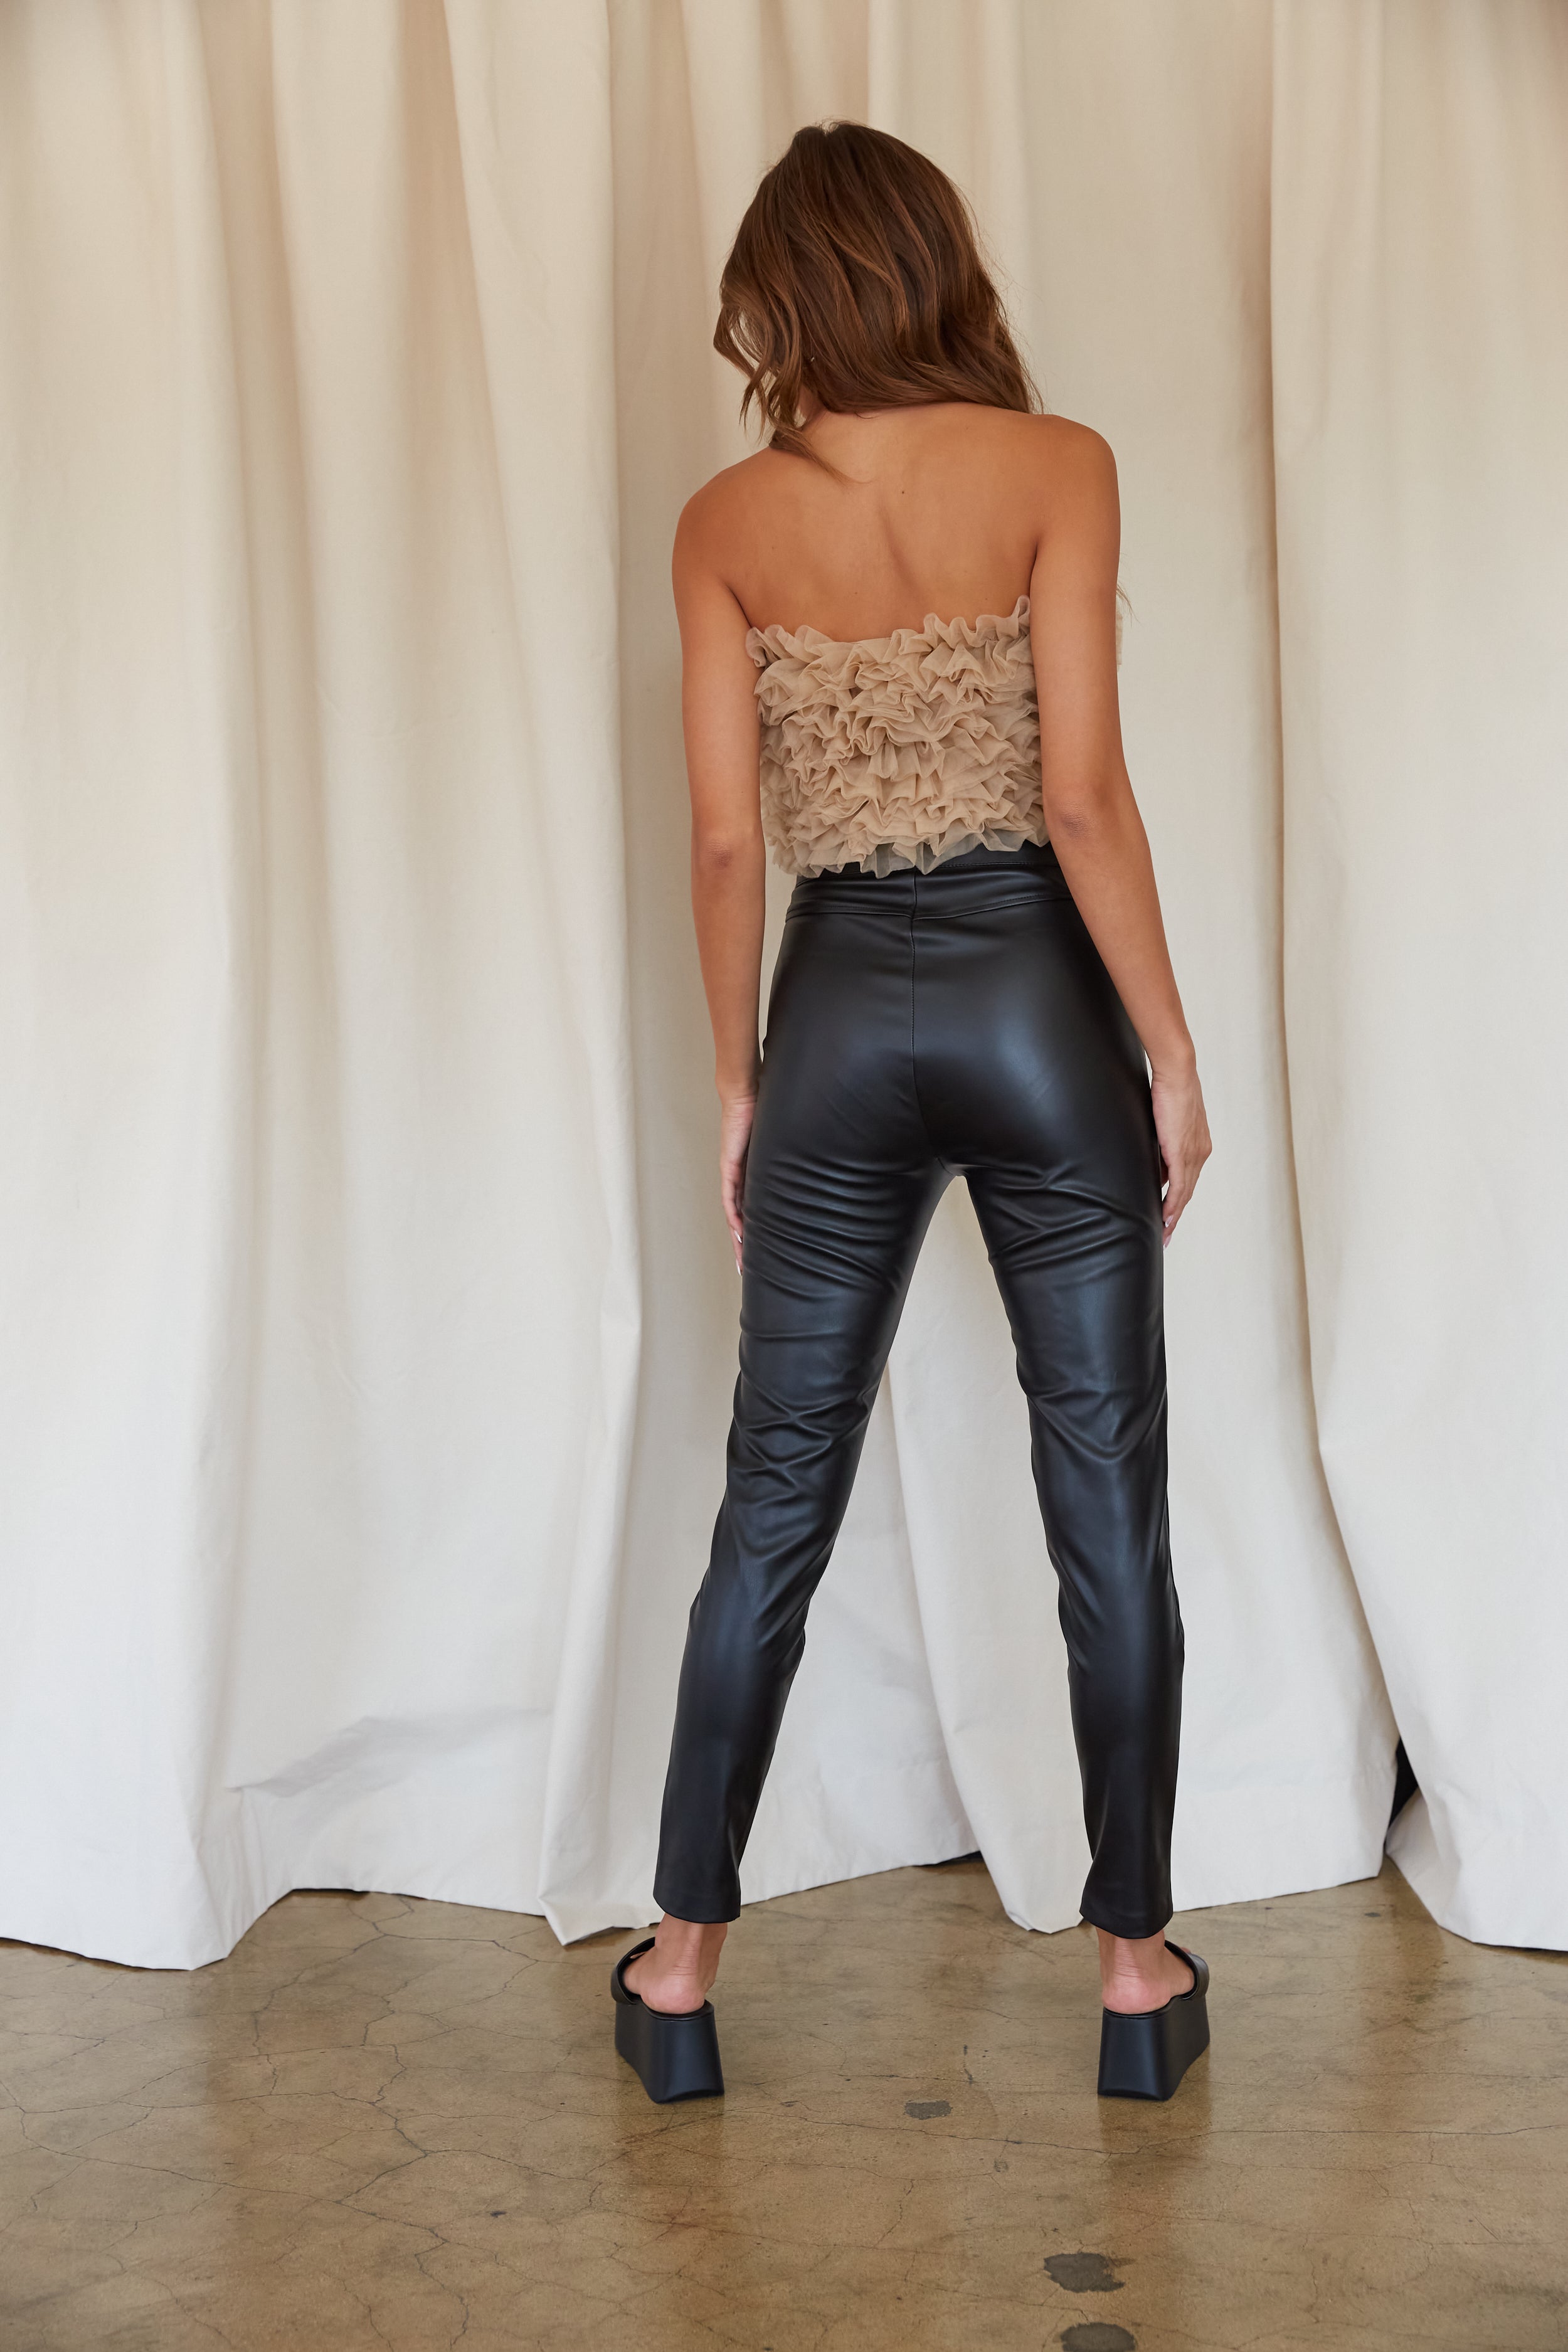 Ice Cold Edgy Chic in a Snakeskin and Leather Outfit